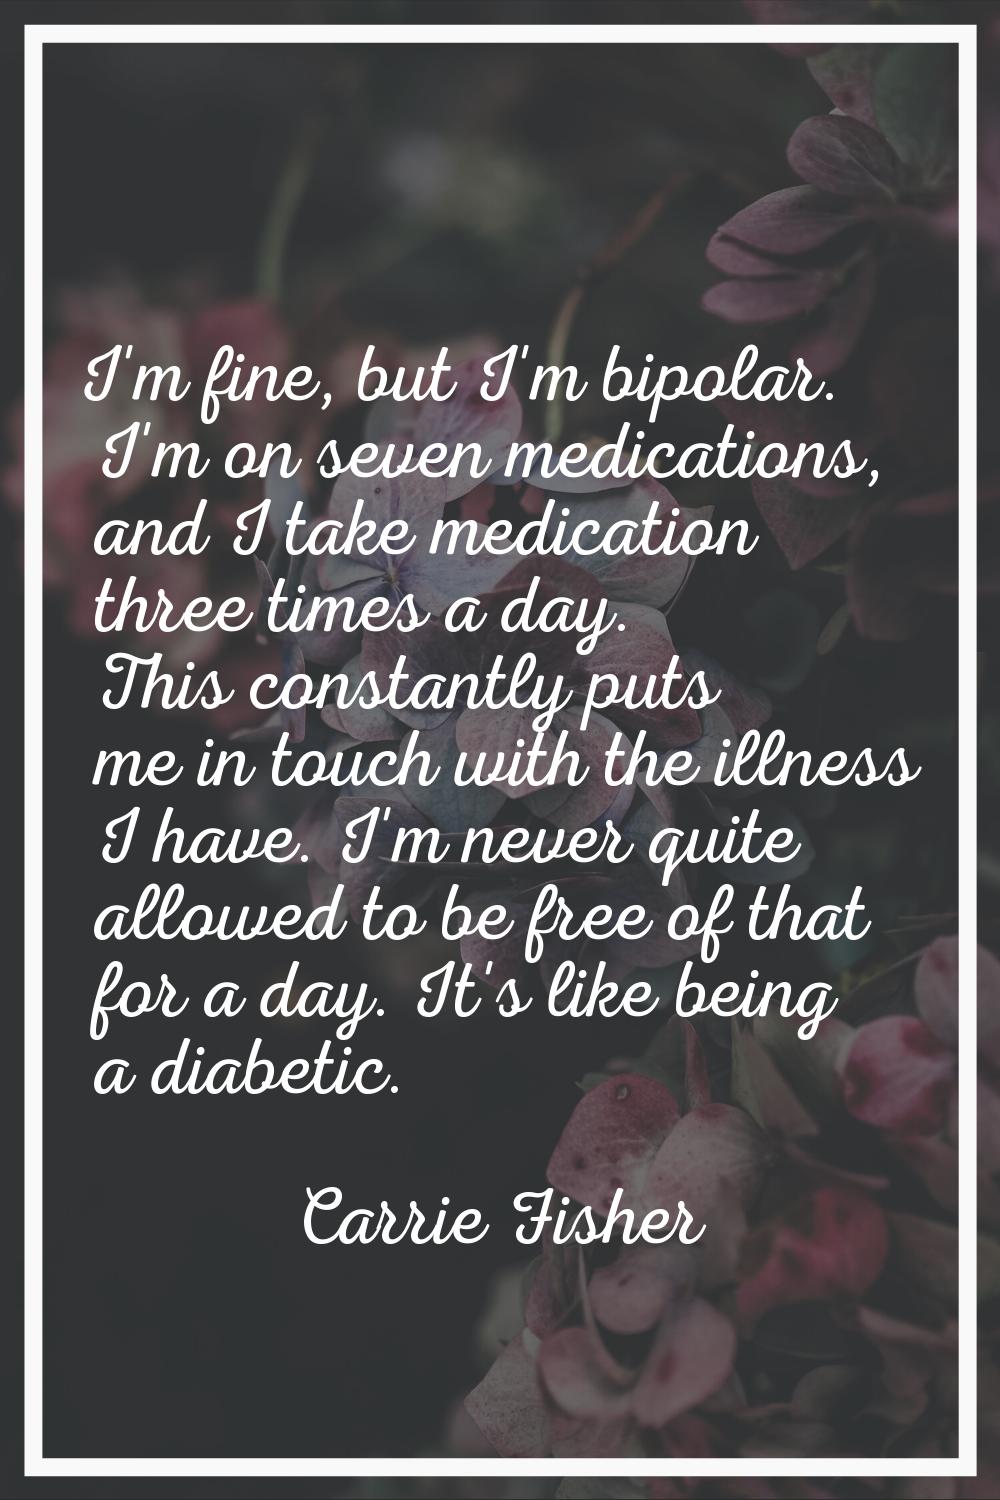 I'm fine, but I'm bipolar. I'm on seven medications, and I take medication three times a day. This 